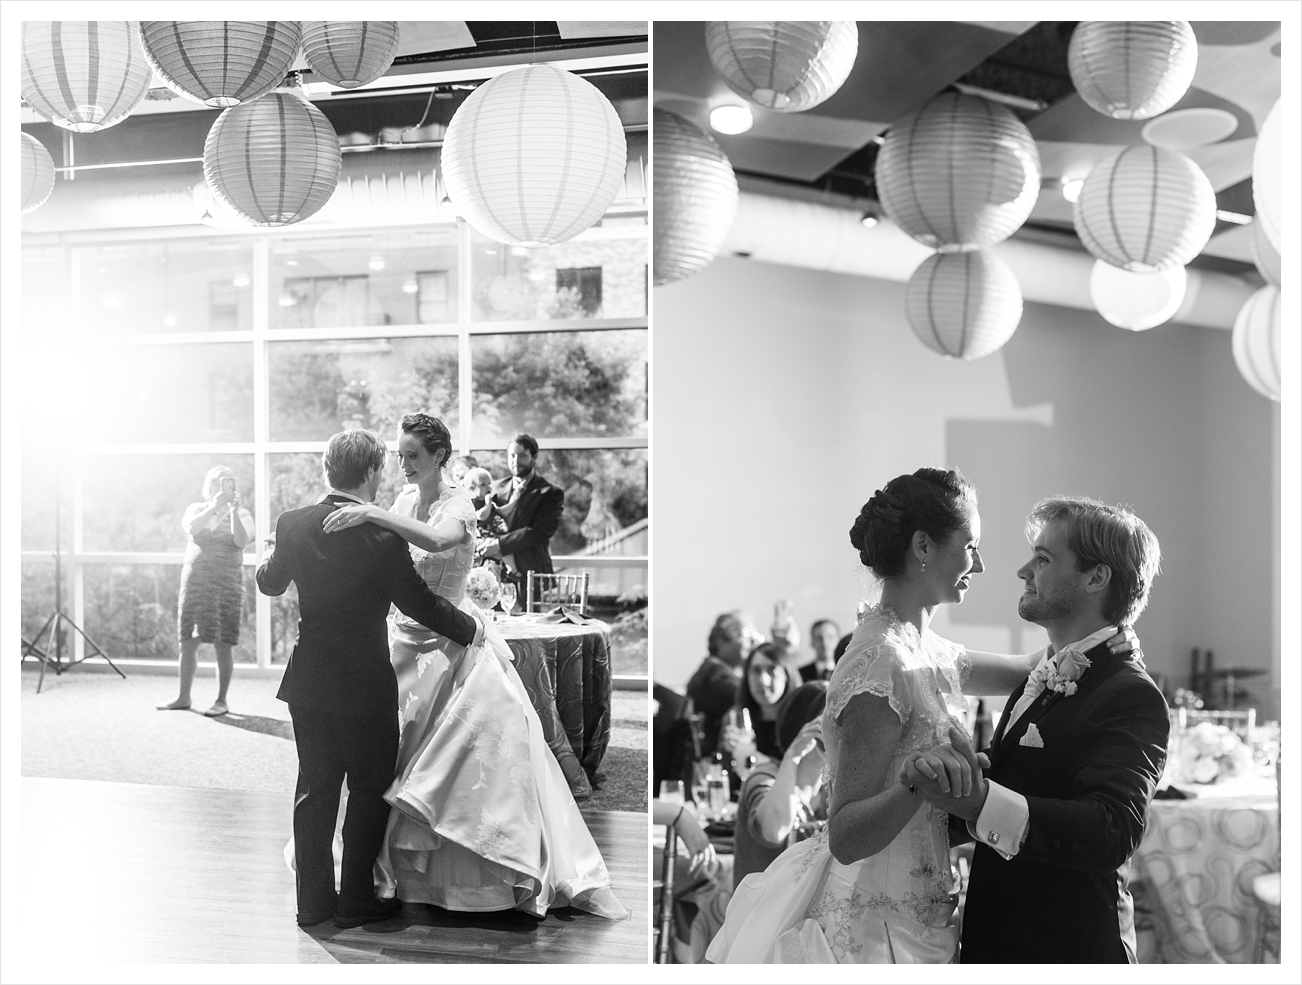 An Artsy Purple Wedding held at the VisArts Museum in Rockville, Maryland by East Coast and Destination Fine Art Photographer Lauren R Swann